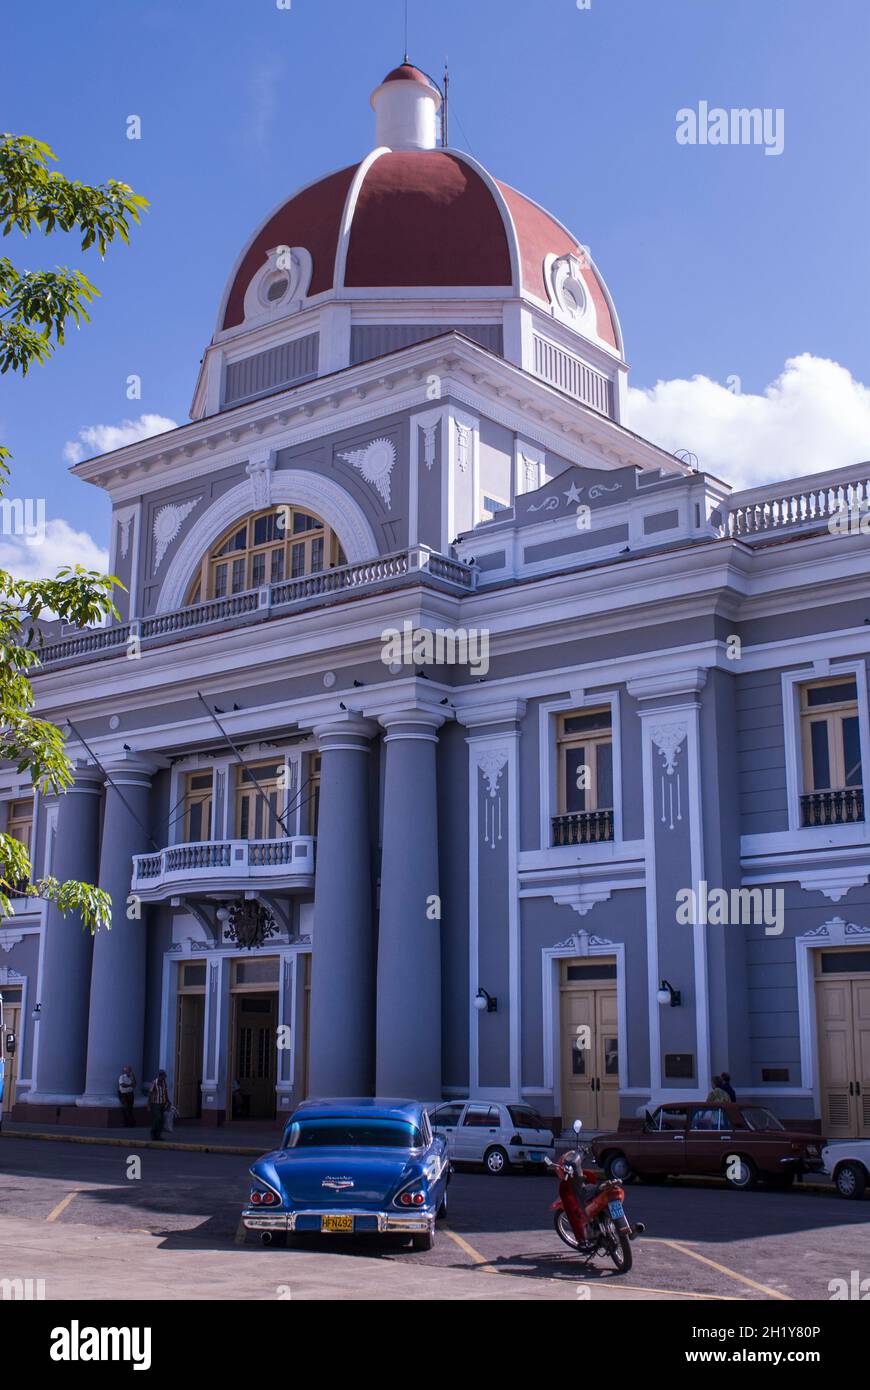 Impressive frontage and dome of colonial Palacio de Gobierno on Plaza Jose Marti with typical classic american car parked in front. Cienfuegos, Cuba. Stock Photo